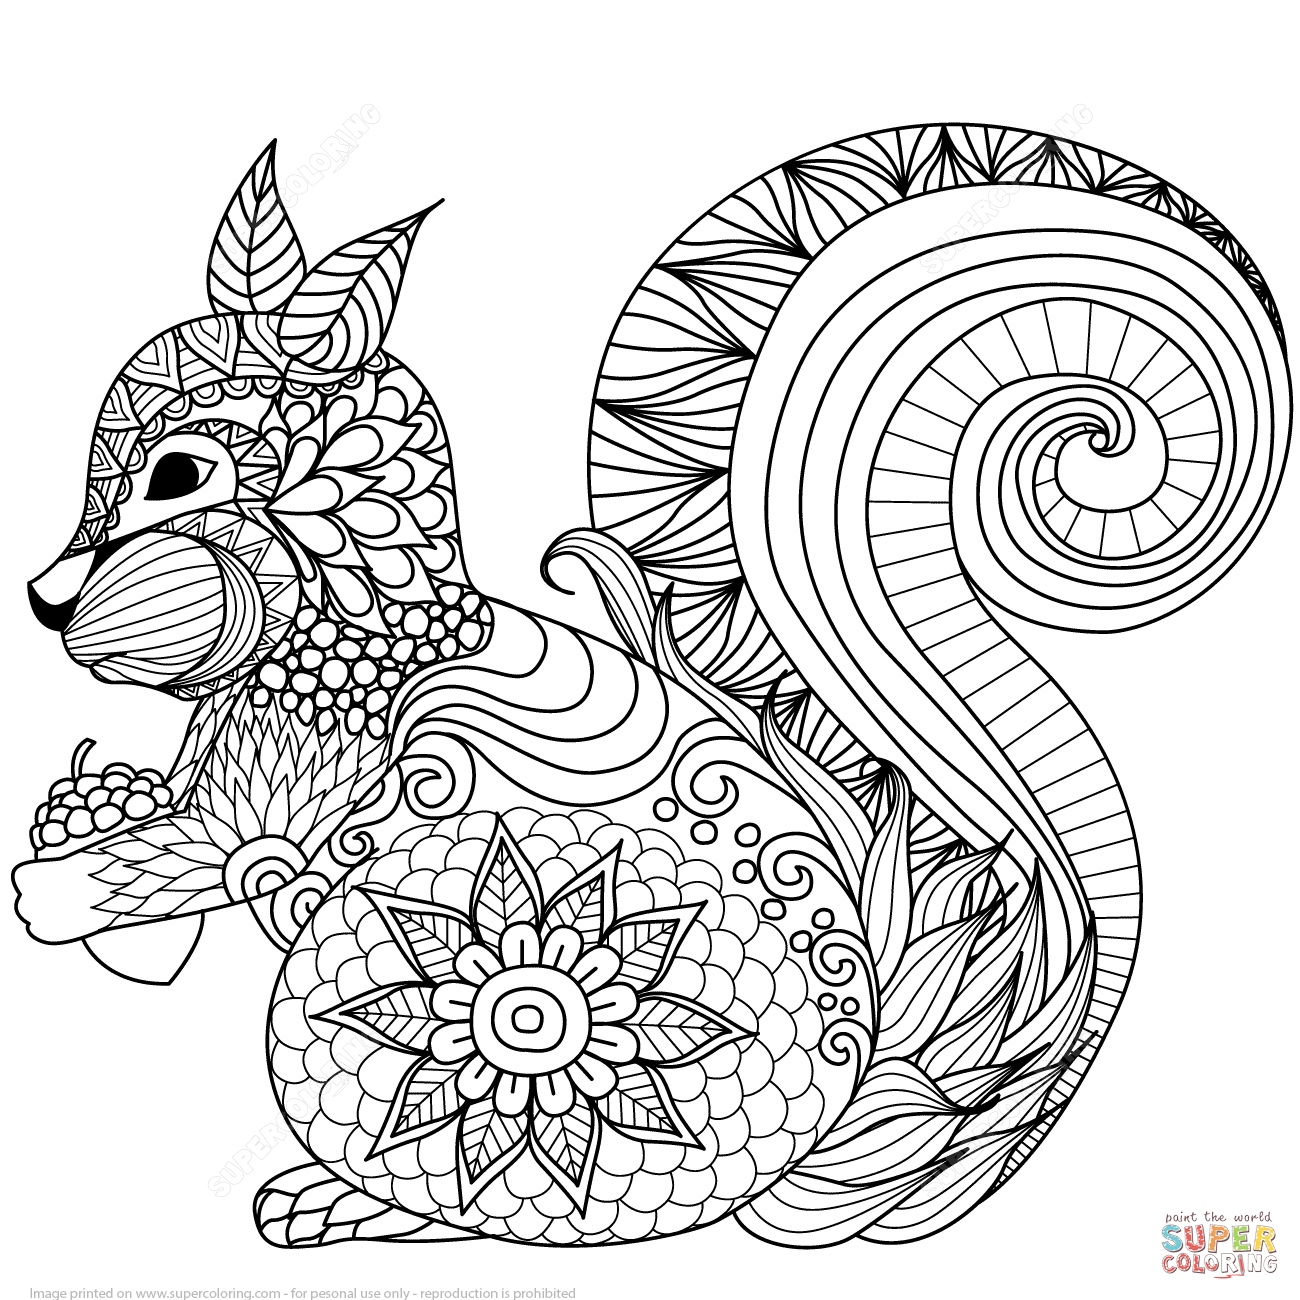 Zentangle Animal Coloring Pages at Free printable